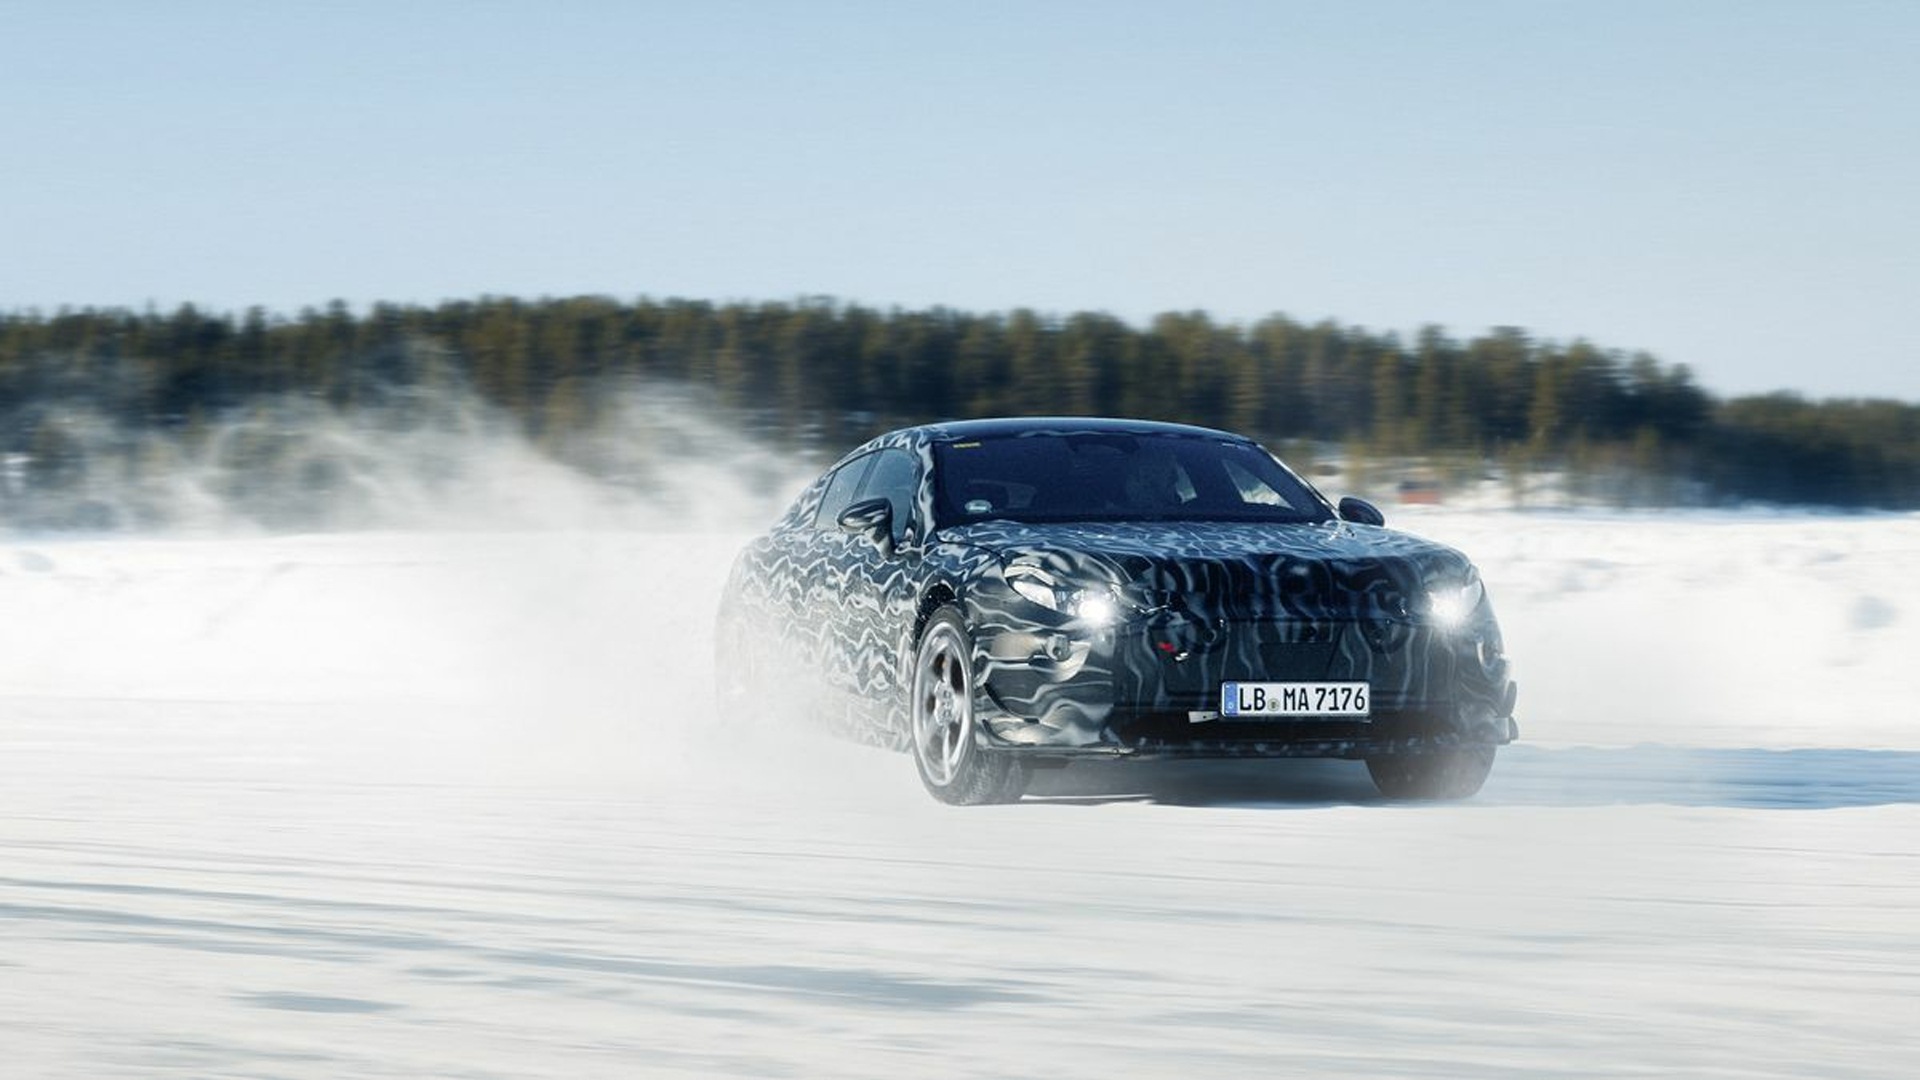 The Mercedes-AMG Being Tested In The Snow (Credits Mercedes-Benz)